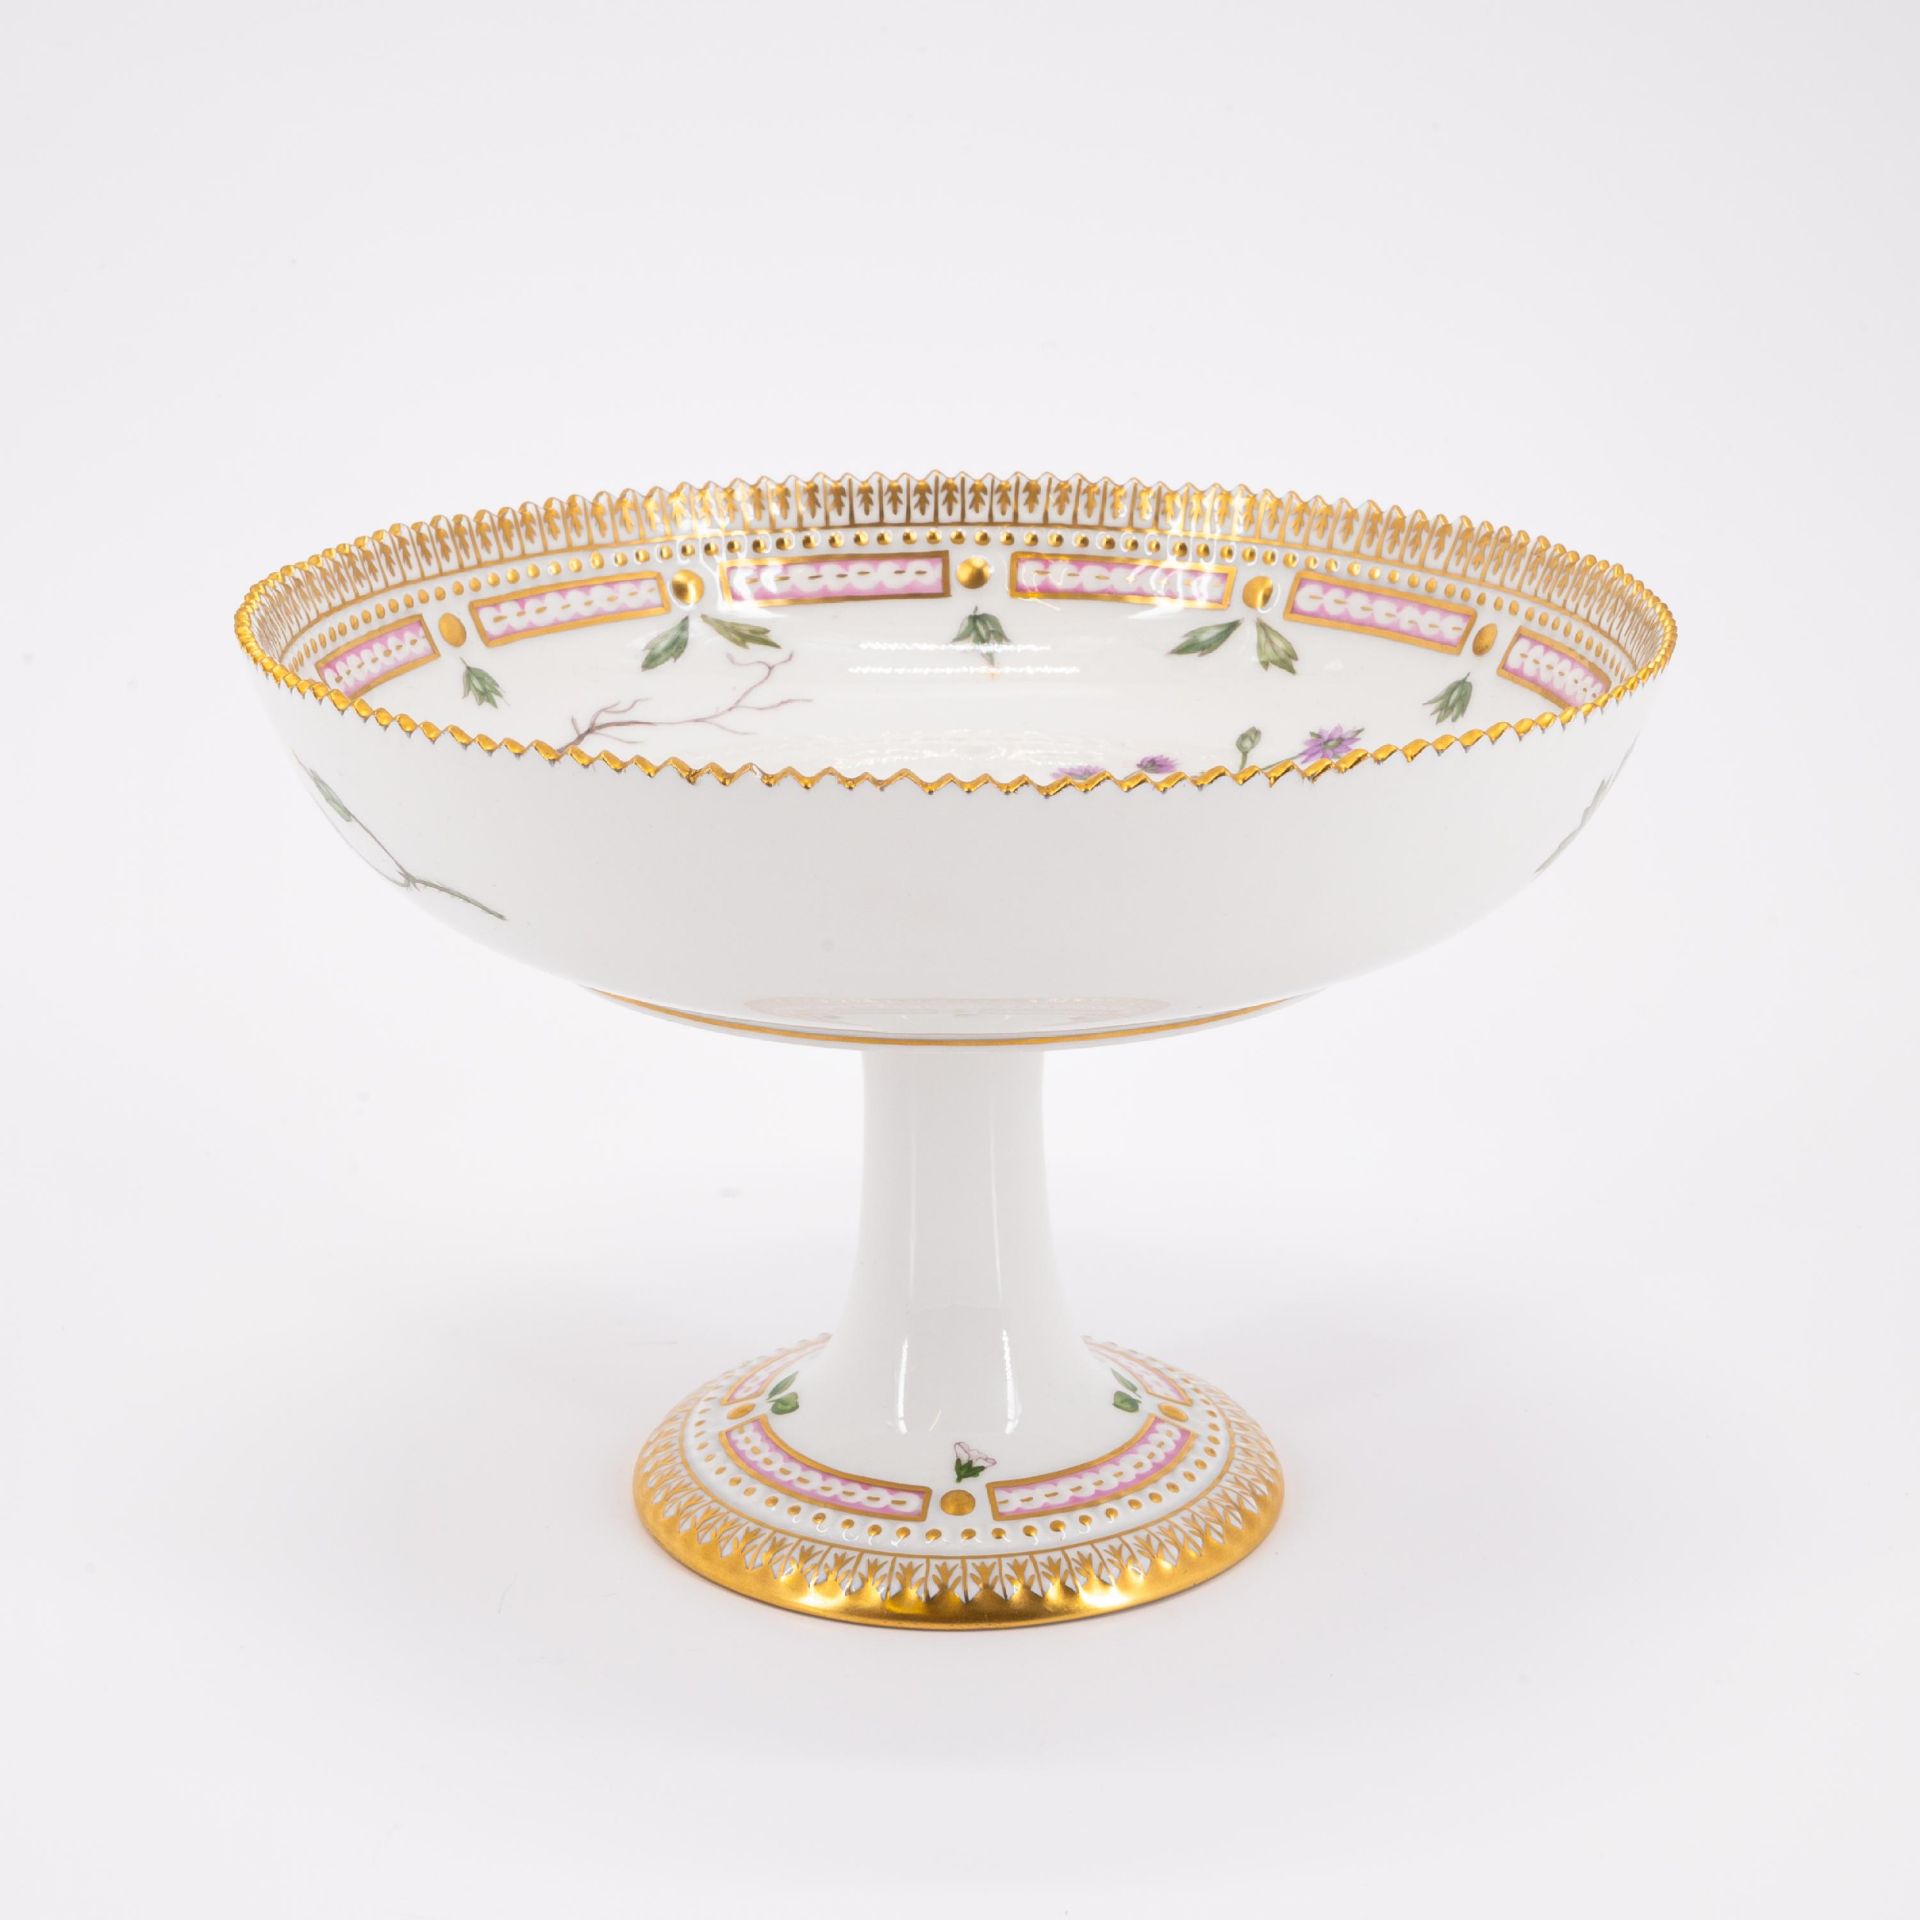 Royal Copenhagen: 95 PIECES FROM A 'FLORA DANICA' DINING SERVICE - Image 10 of 26